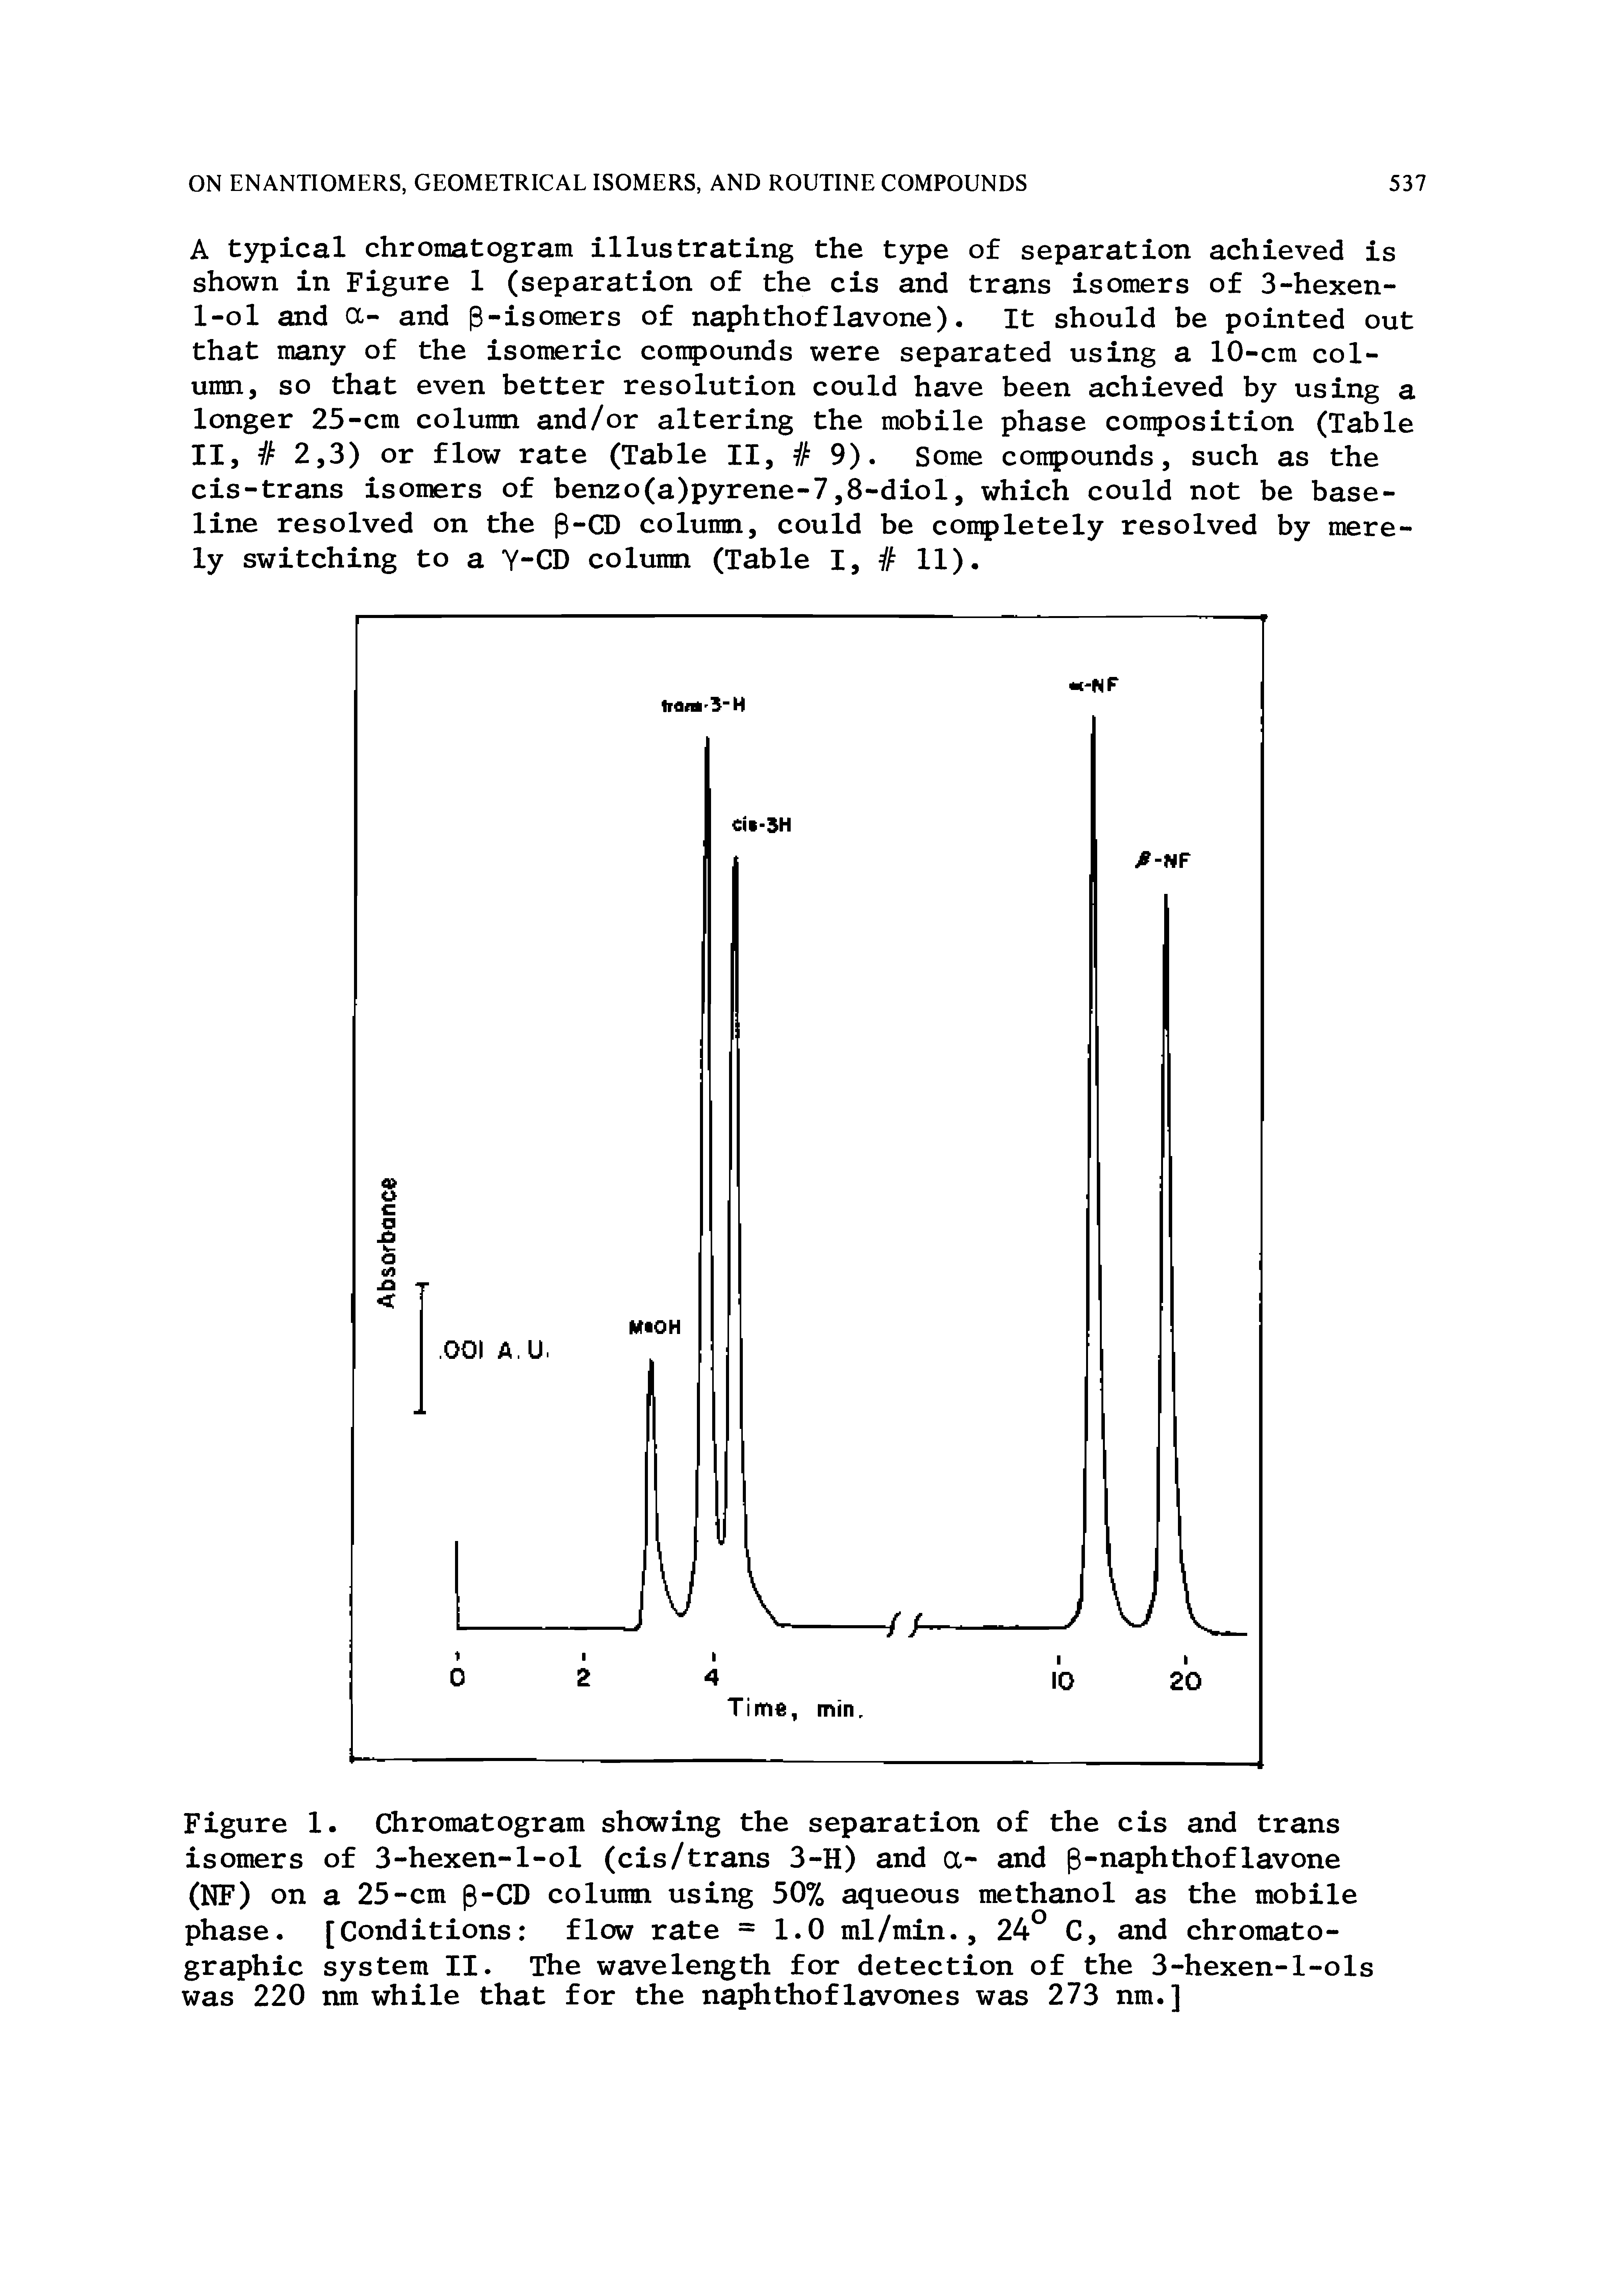 Figure 1. Chromatogram showing the separation of the cis and trans isomers of 3-hexen-l-ol (cis/trans 3-H) and a and p-naphthoflavone (NF) on a 25-cm p-CD column using 50% aqueous methanol as the mobile phase. [Conditions flow rate = 1.0 ml/min., 24 C, and chromatographic system II. The wavelength for detection of the 3-hexen-l-ols was 220 nm while that for the naphthof lavone s was 273 nm.]...